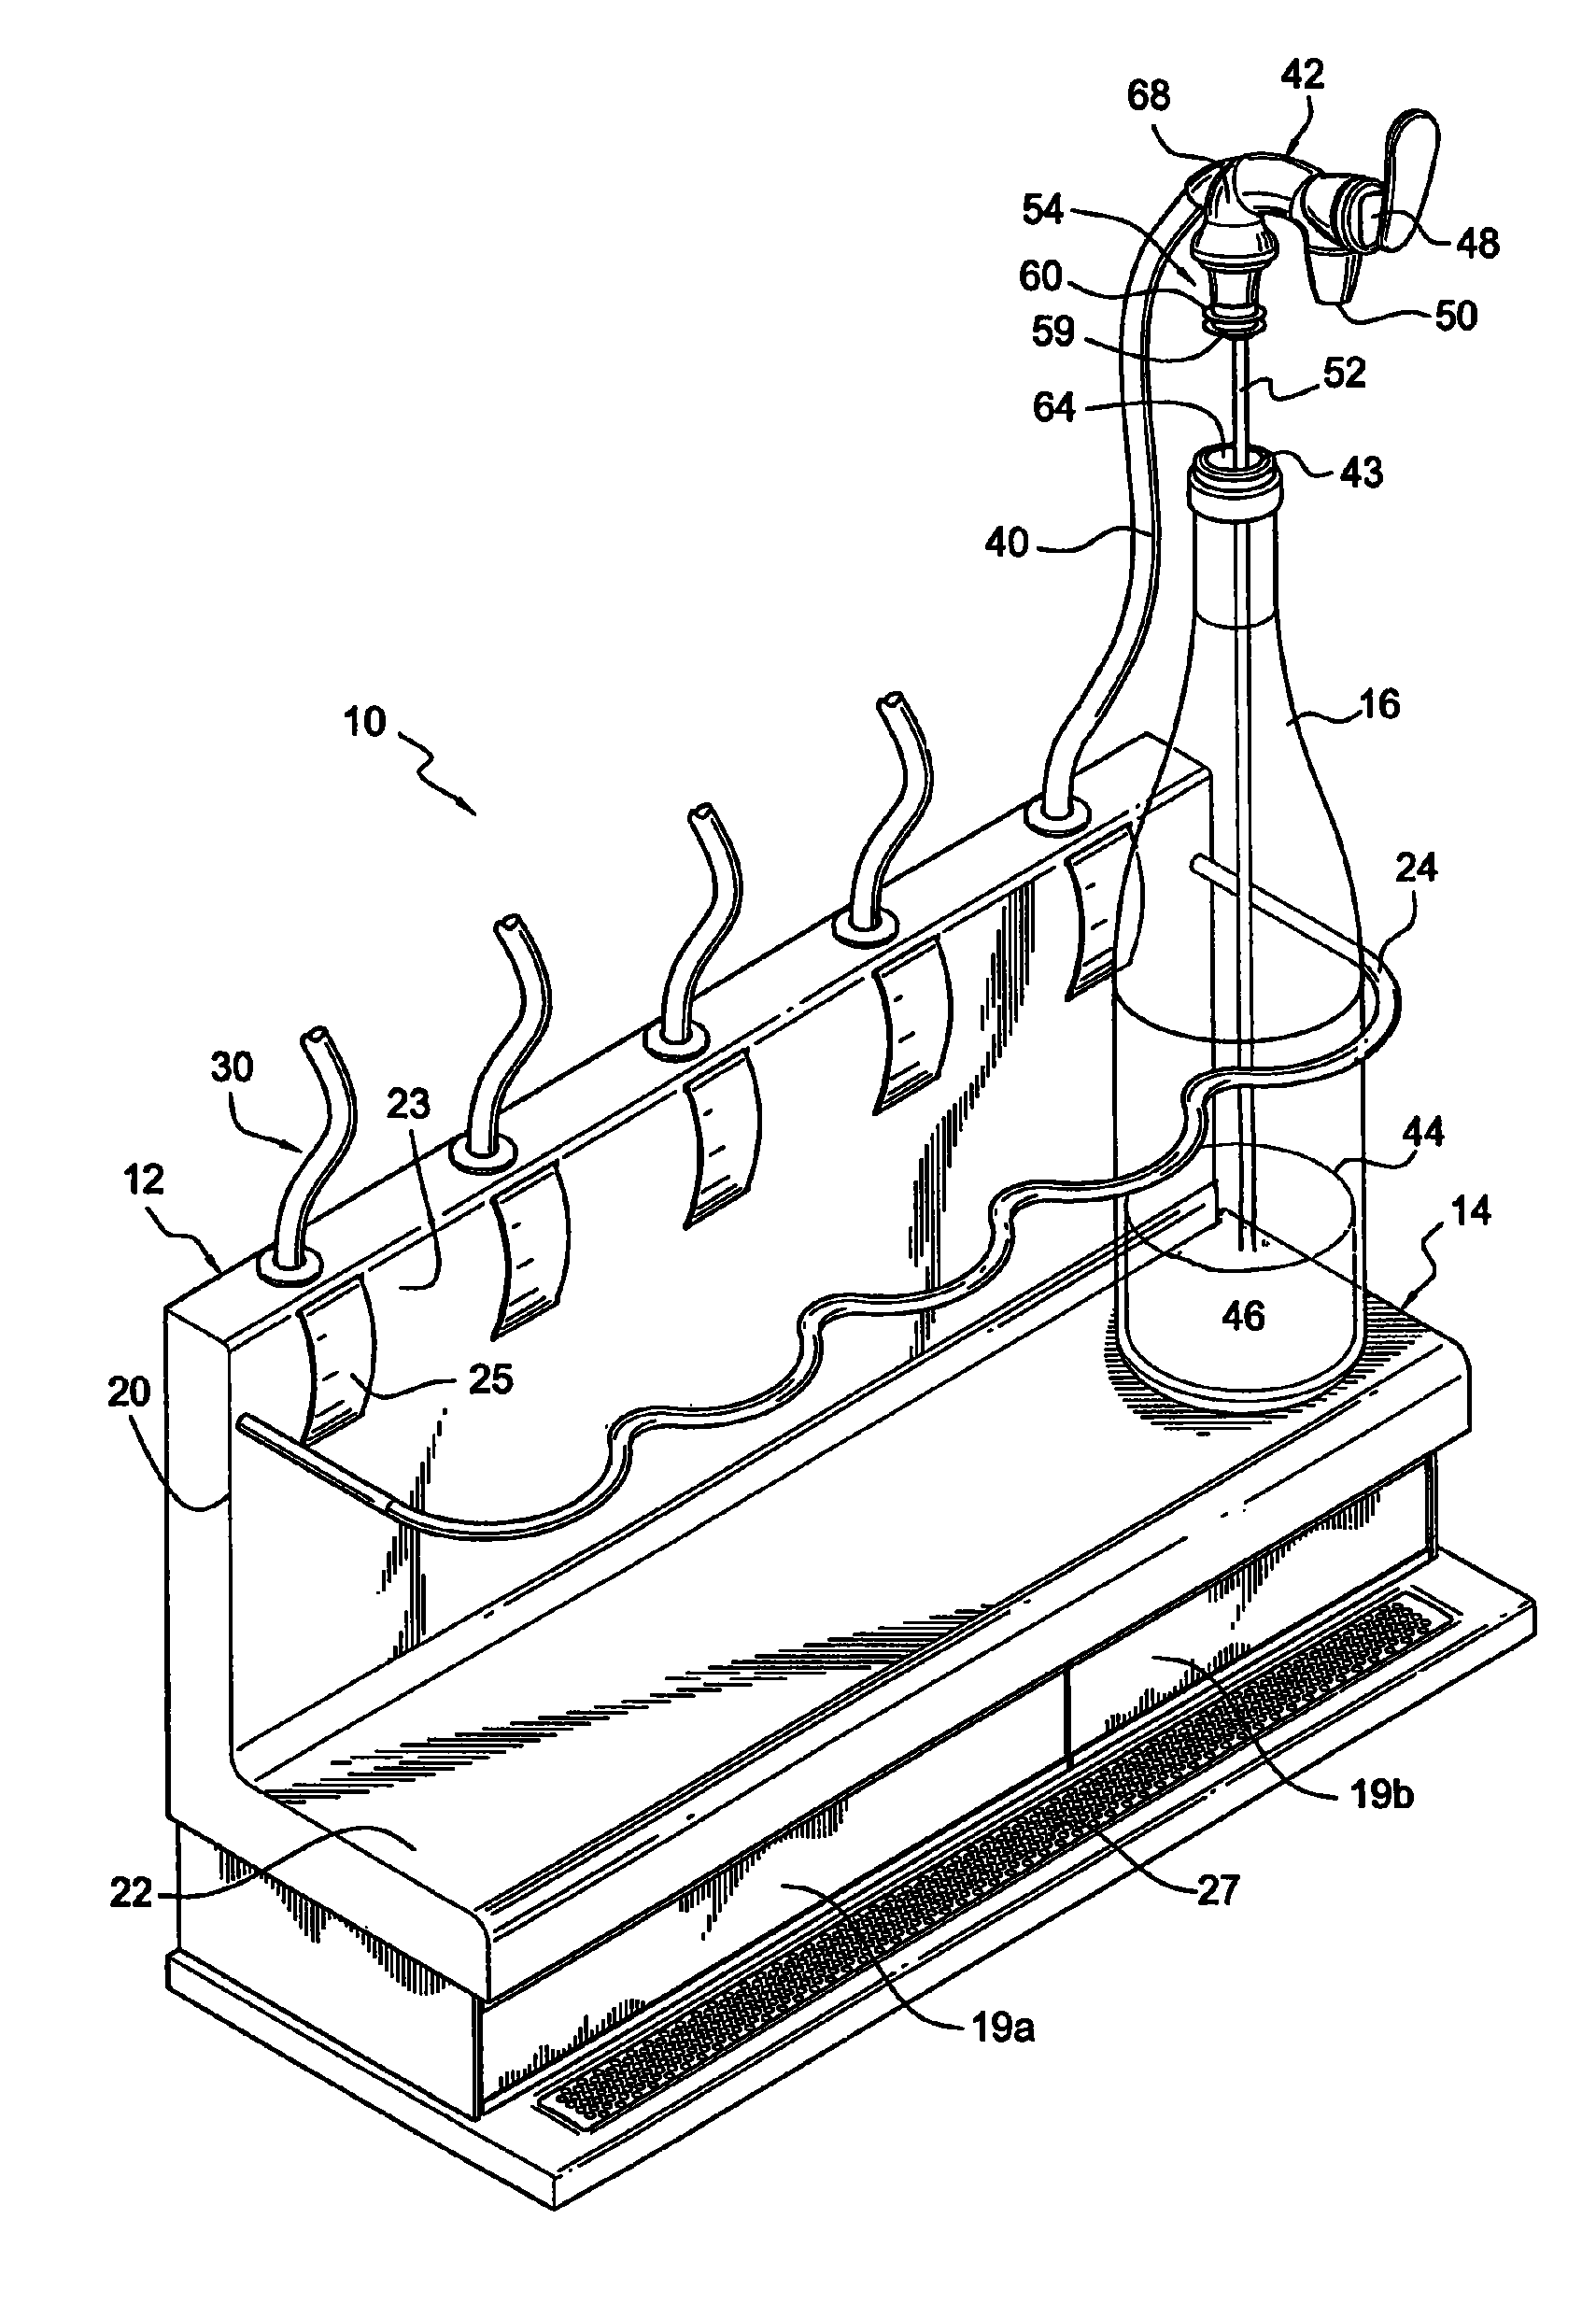 Wine preservation and dispensing apparatus